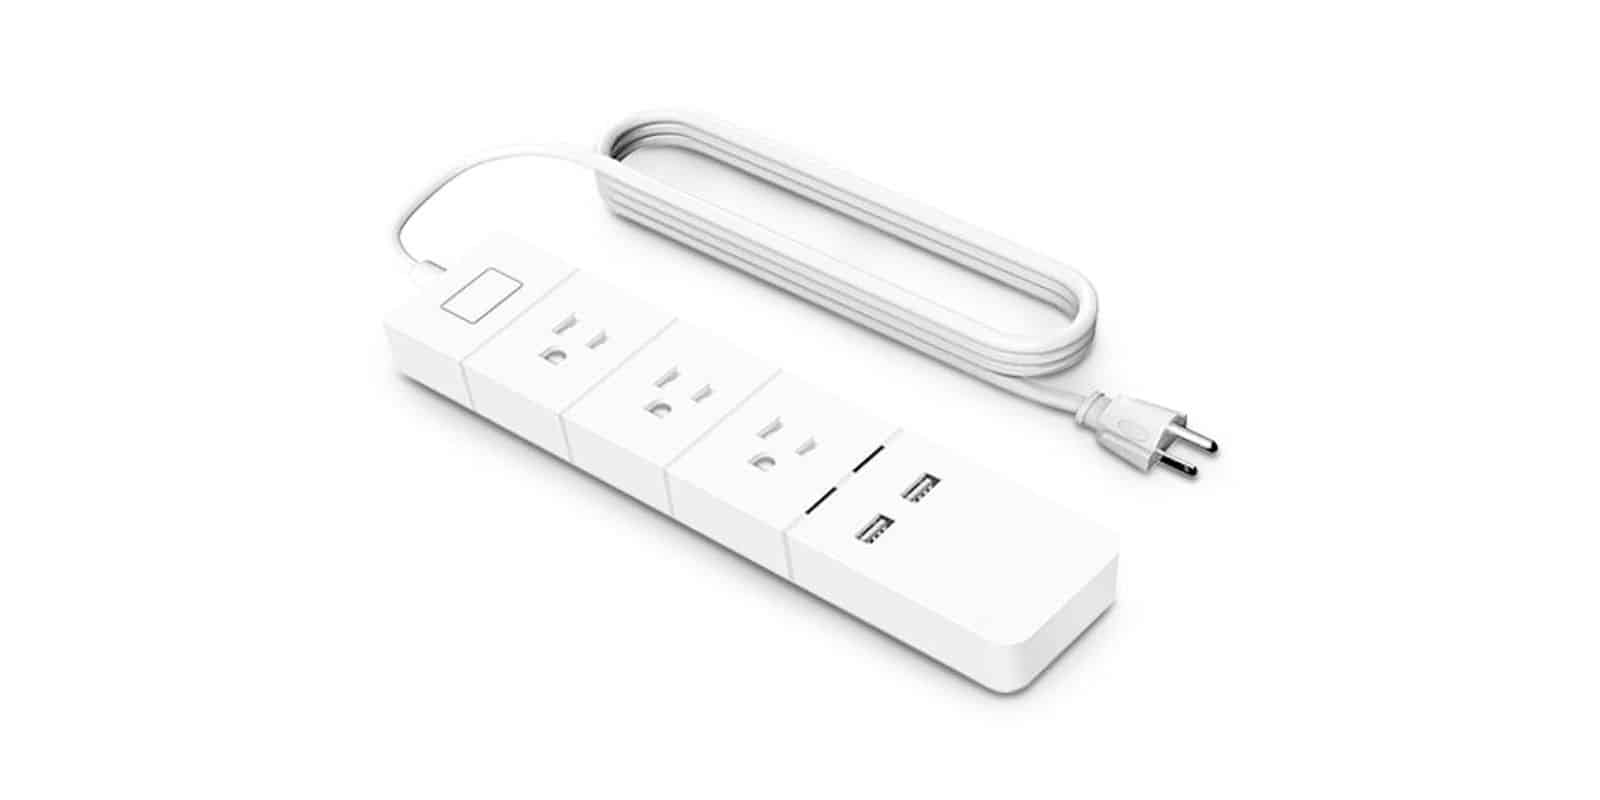 Gain complete control of your power usage with this WiFi-enabled smart surge protector.